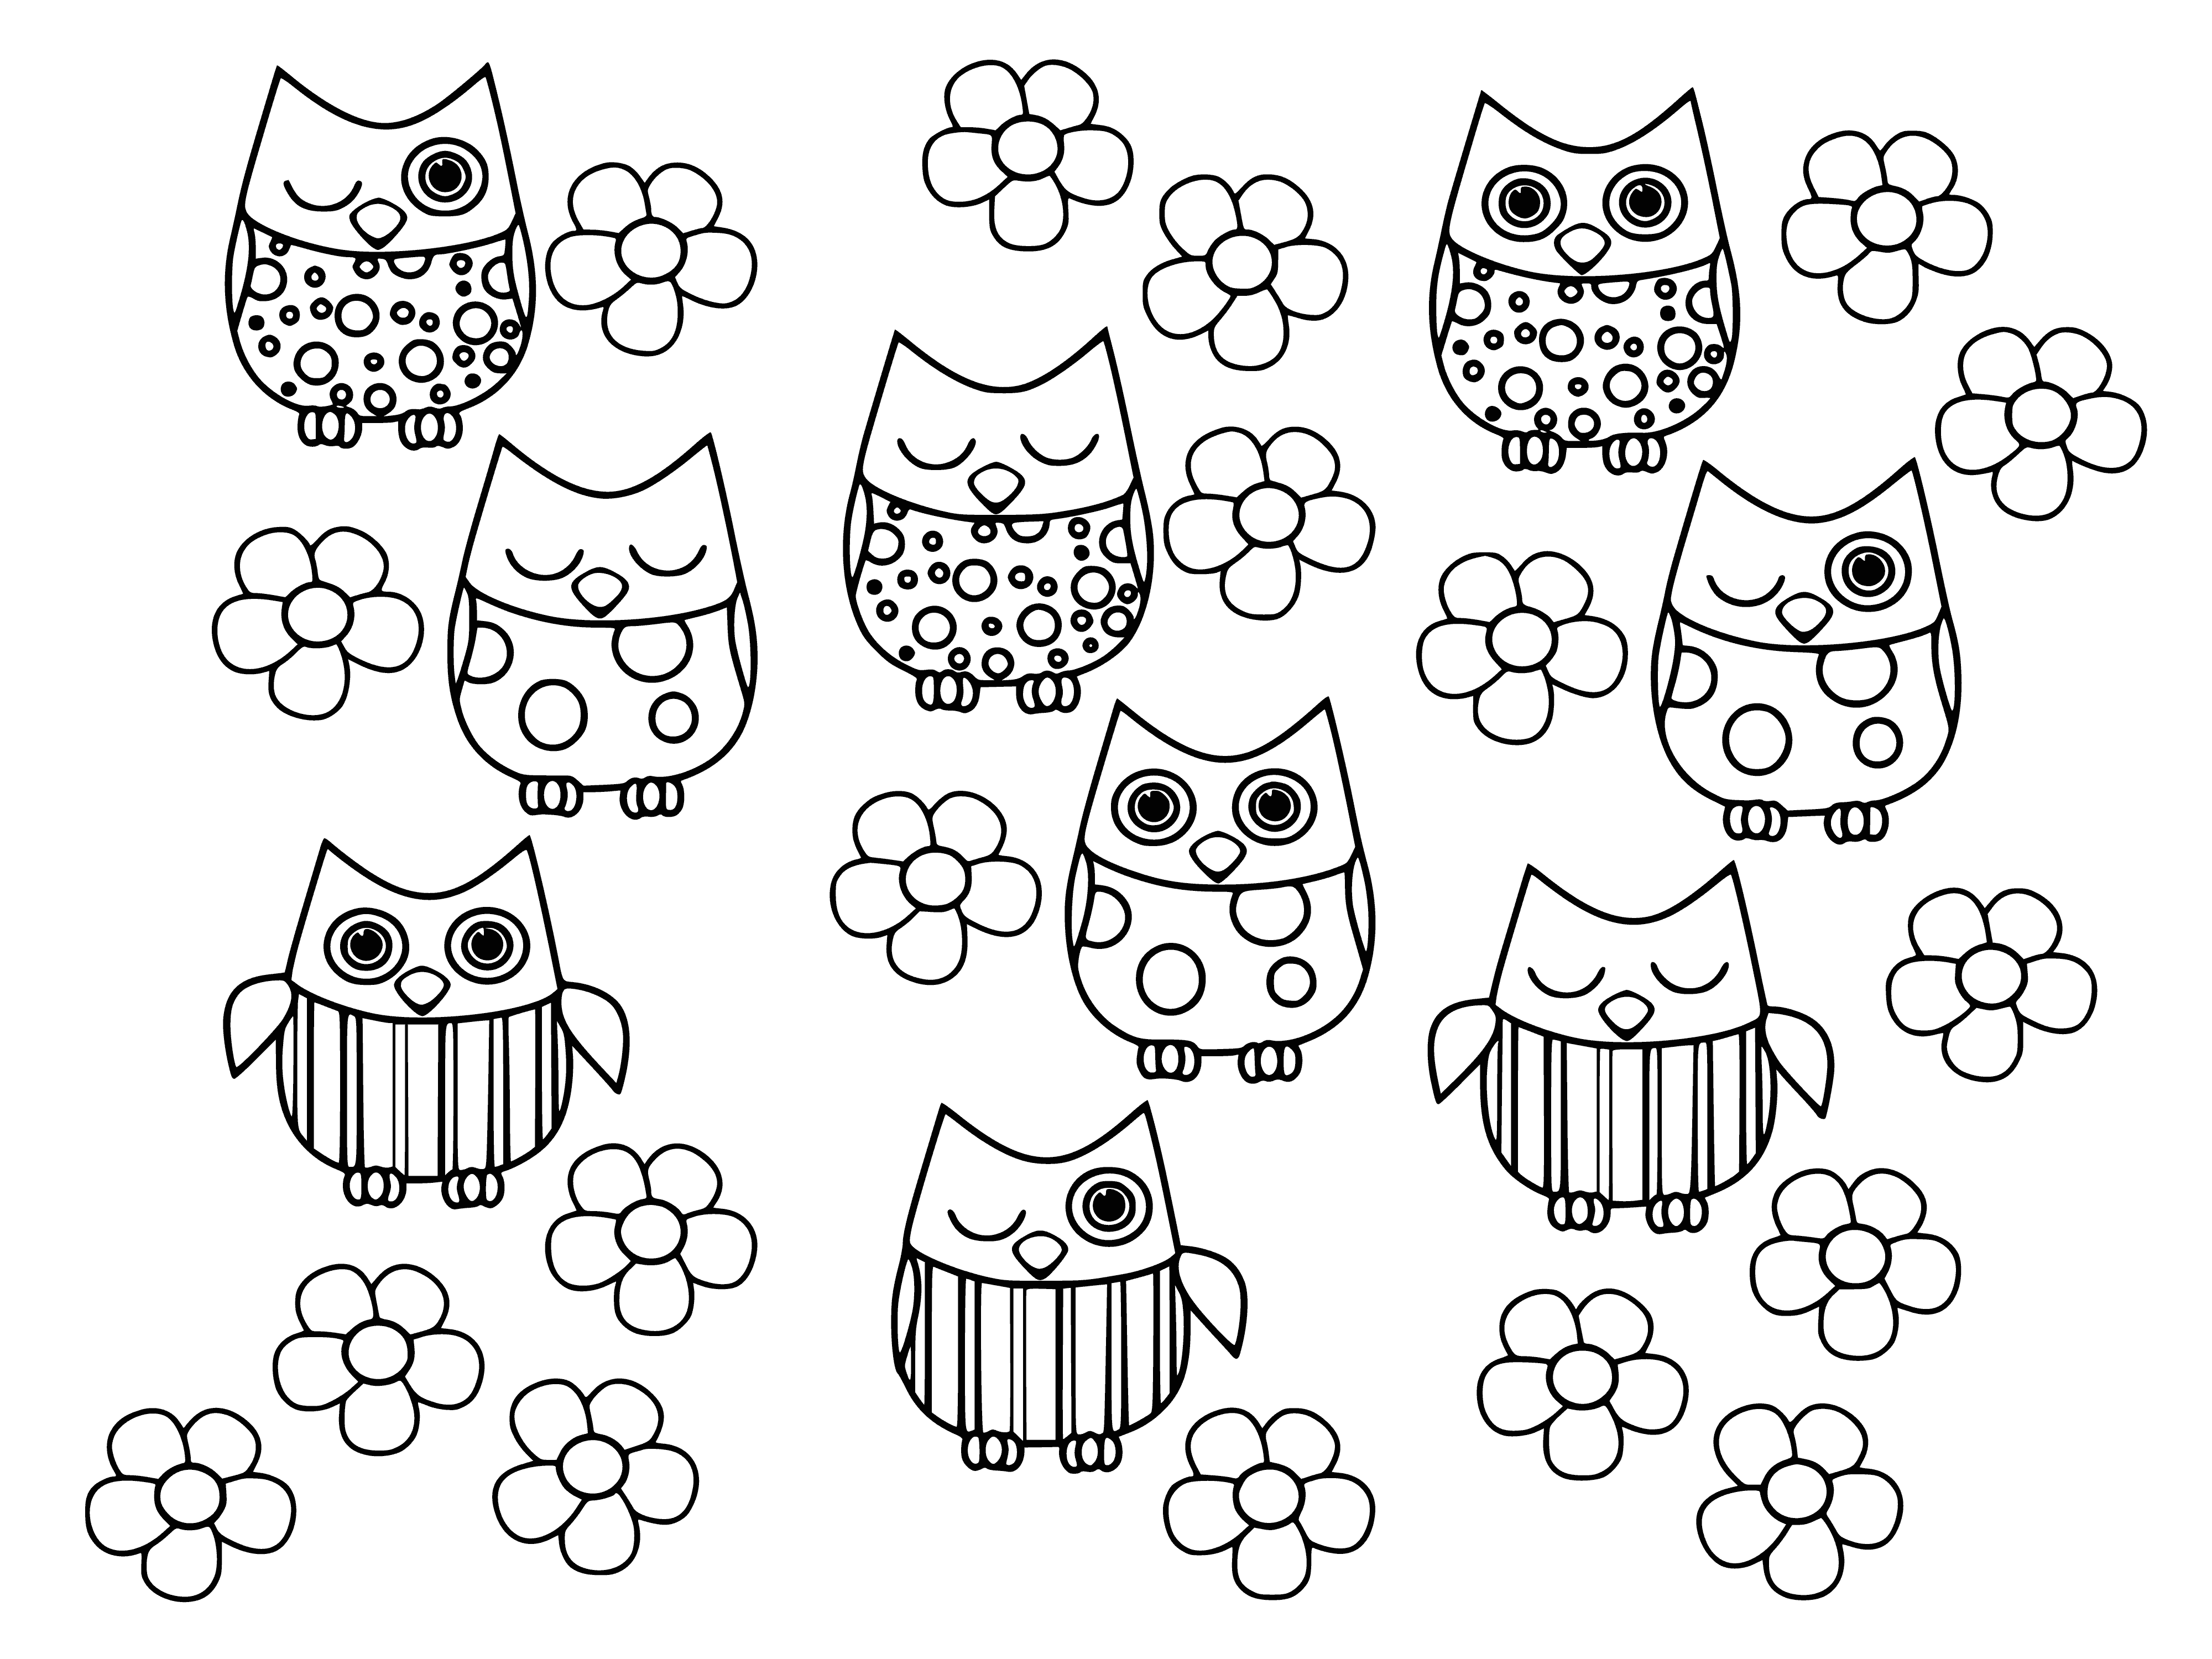 Owls coloring page